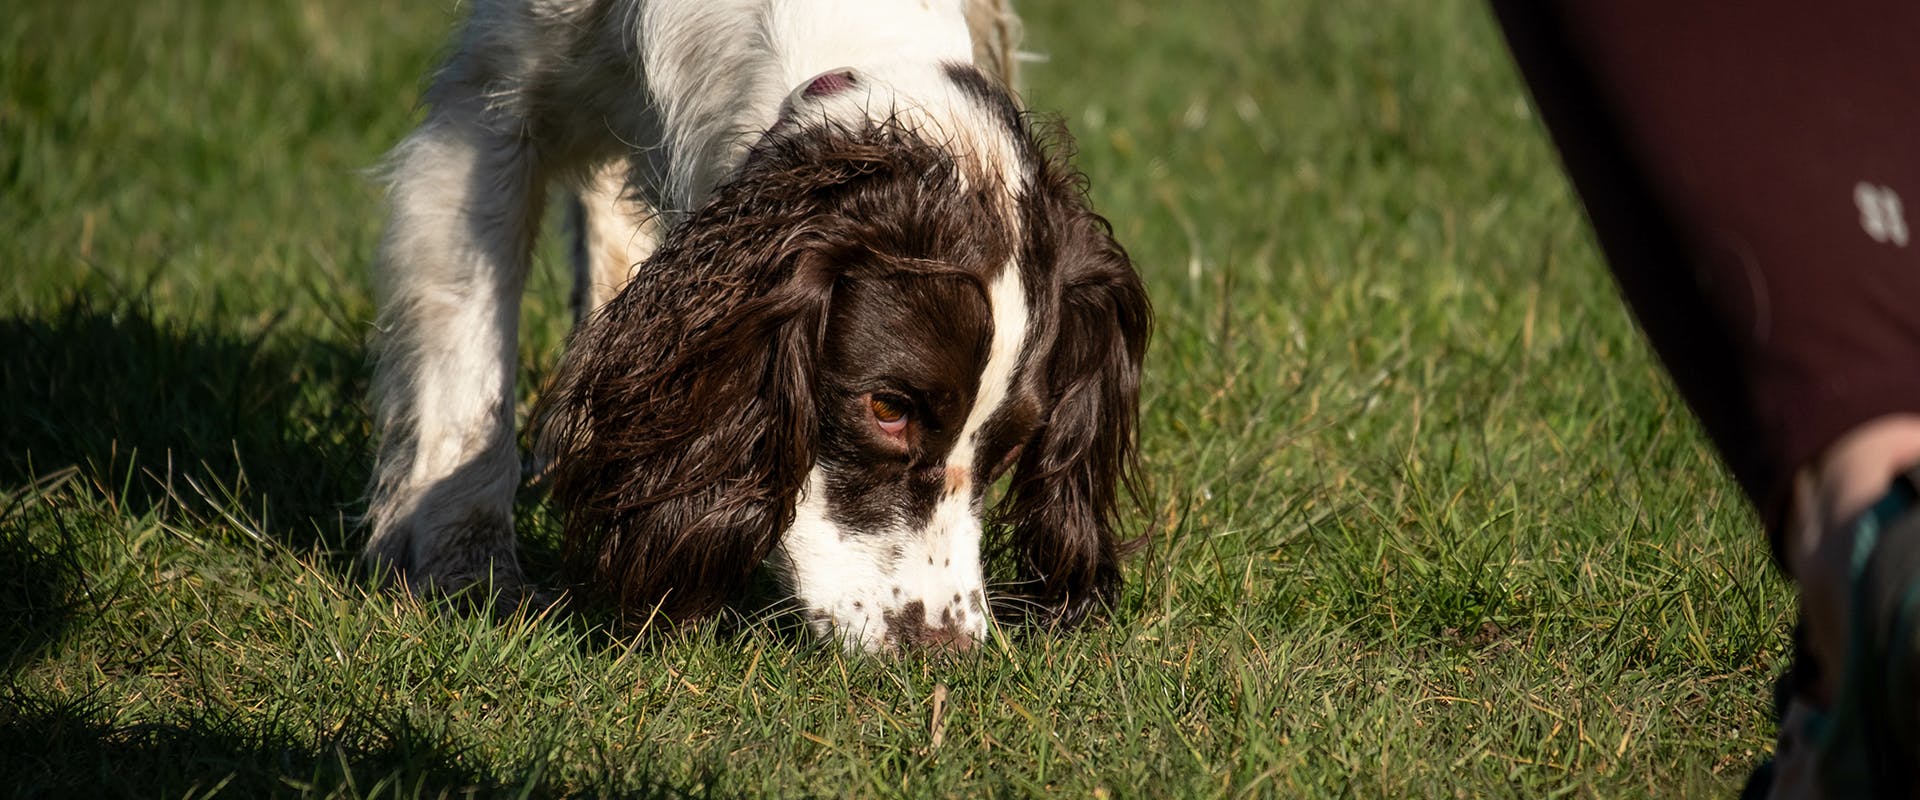 A Sprocker Spaniel dog with its nose to the ground